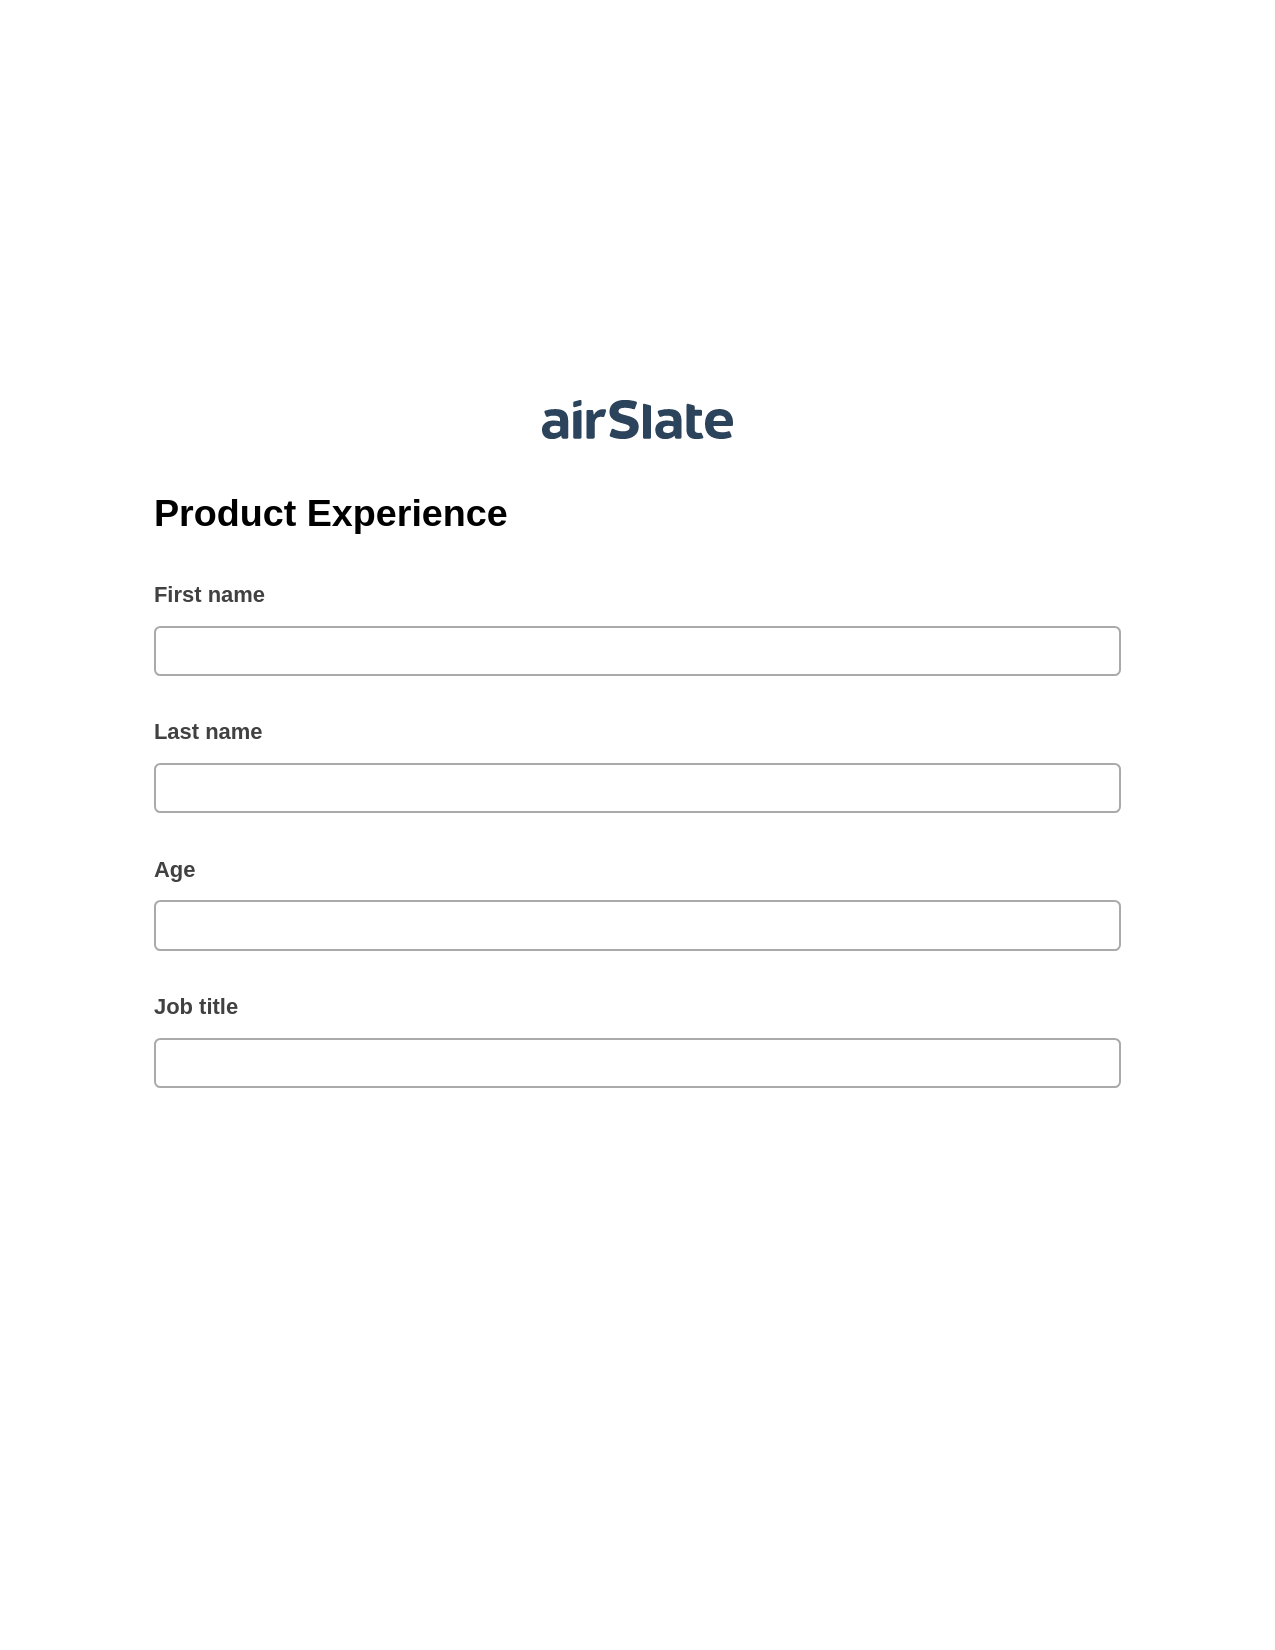 Product Experience Pre-fill from CSV File Bot, Jira Bot, Slack Two-Way Binding Bot